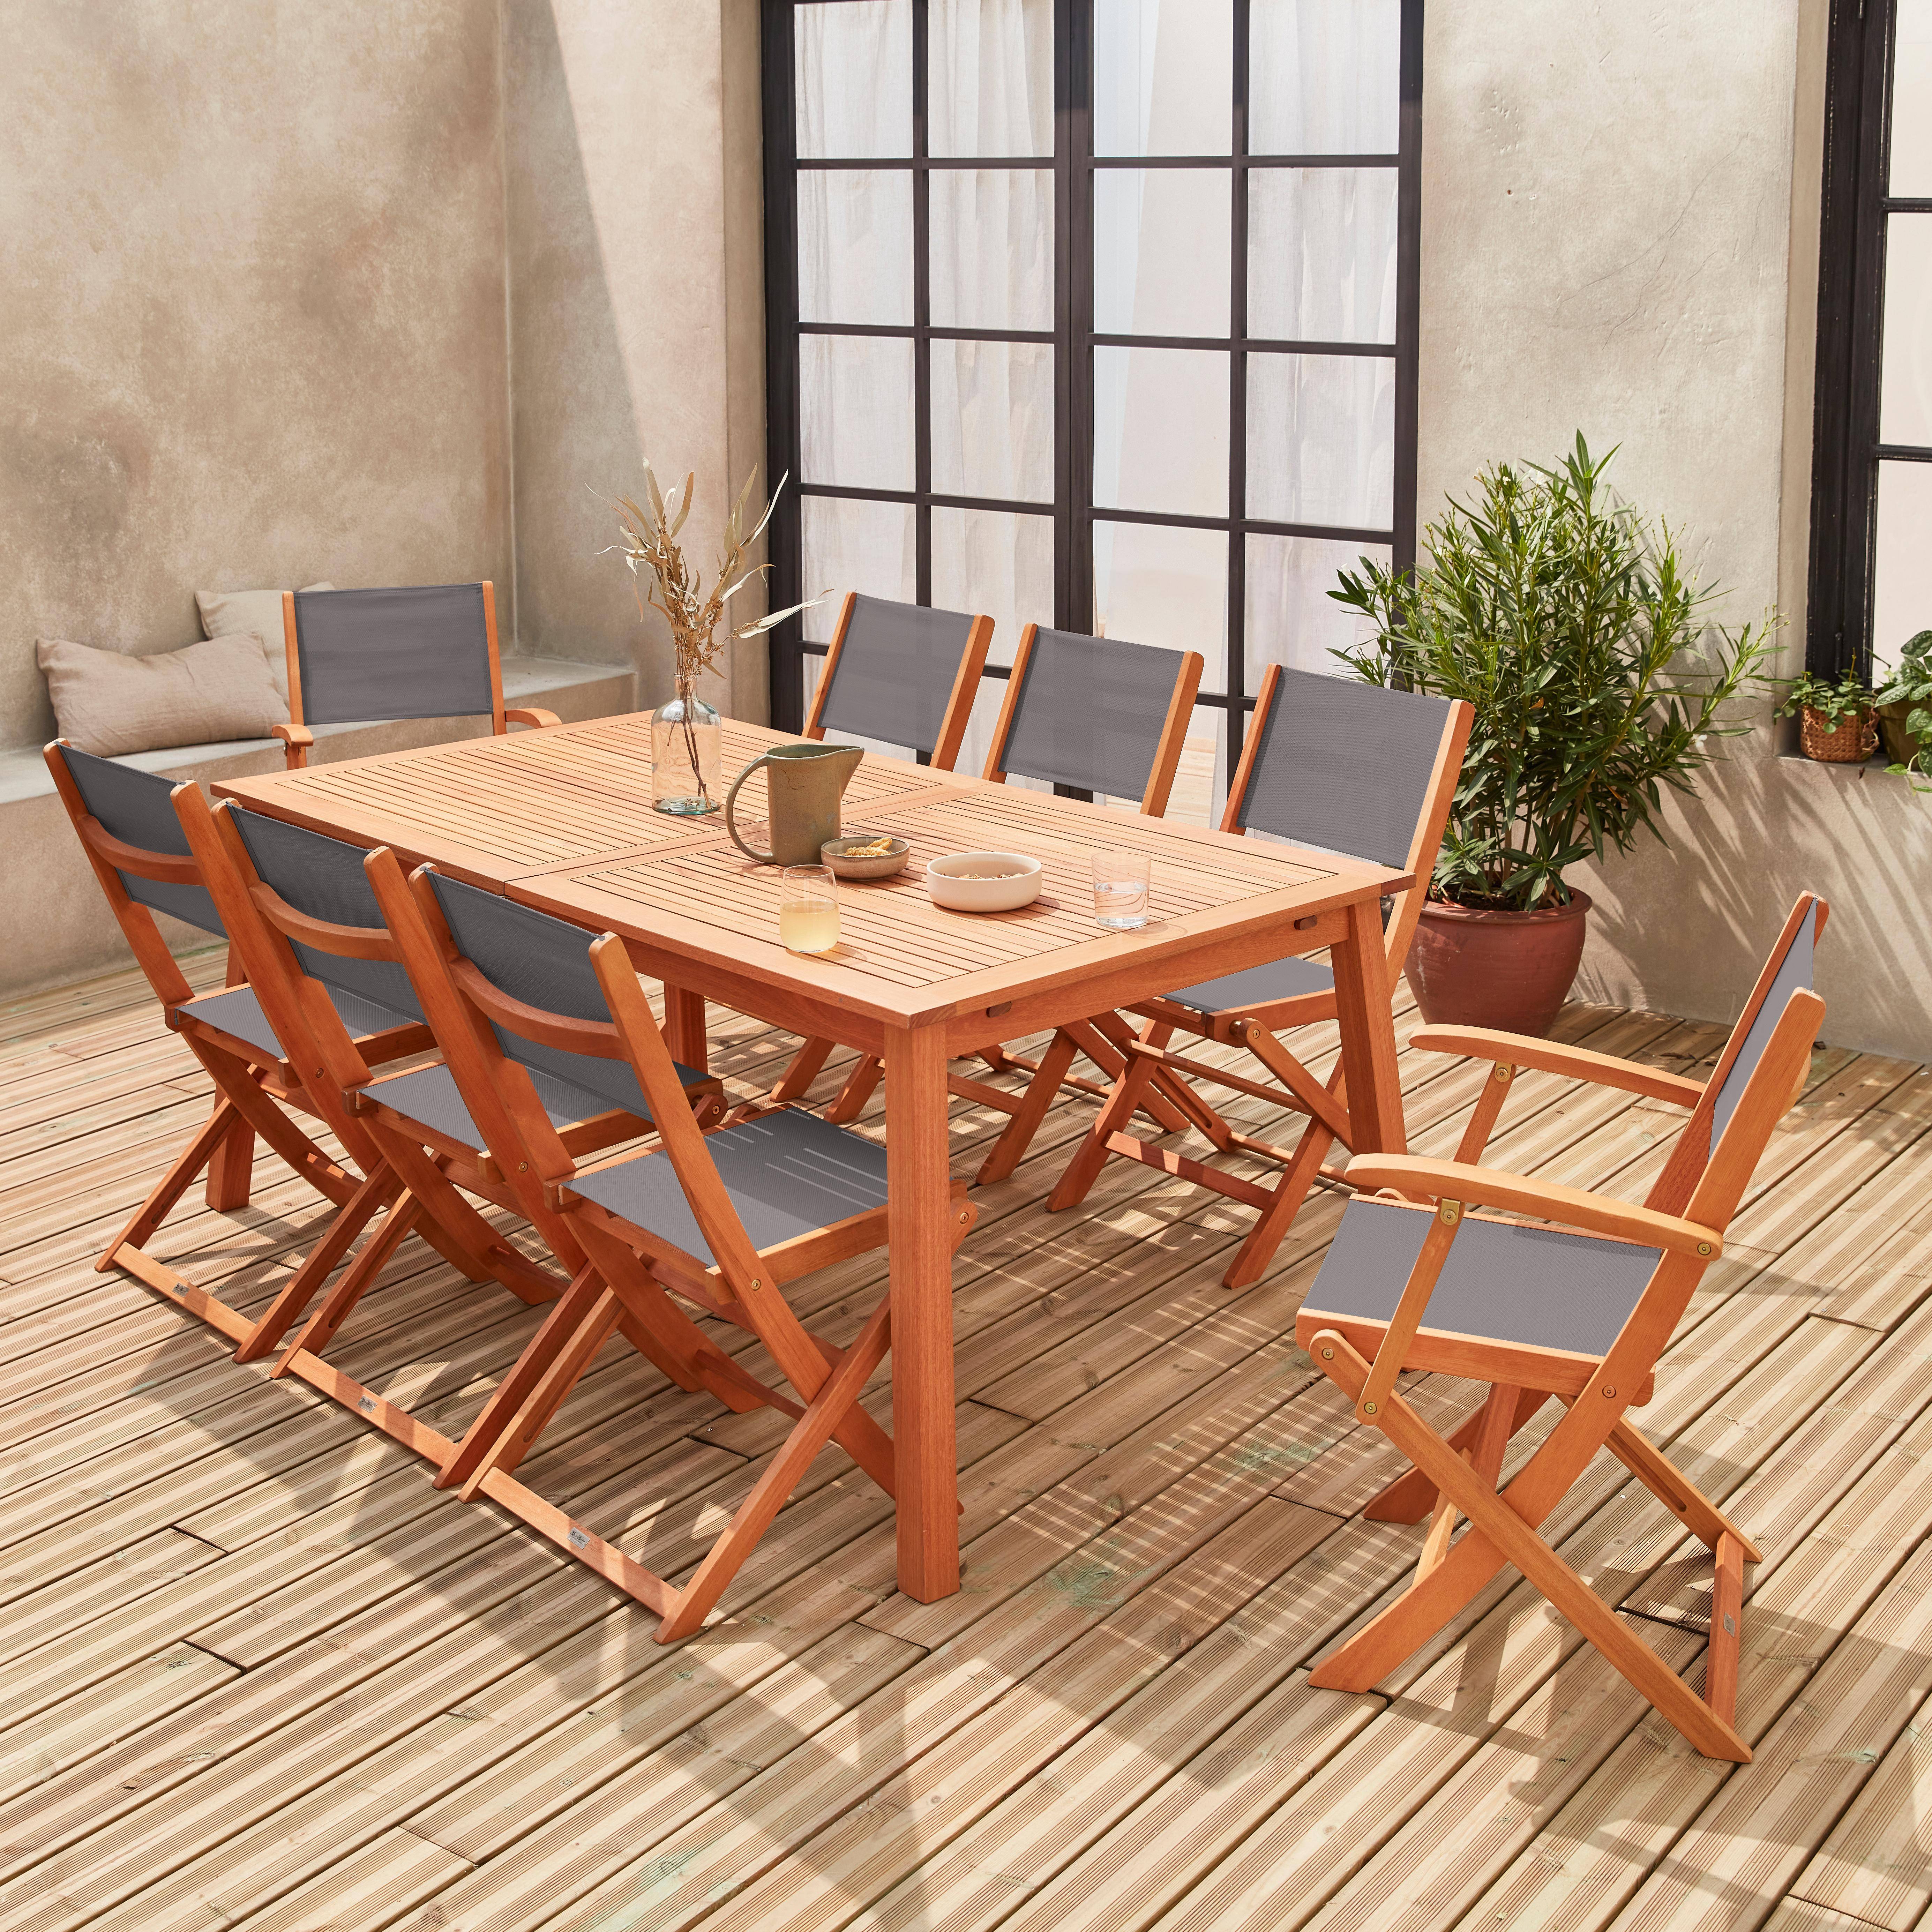 8-seater garden dining set, extendable 180-240cm FSC-eucalyptus wooden table, 6 chairs and 2 armchairs - Almeria 8 - Anthracite textilene seats Photo2